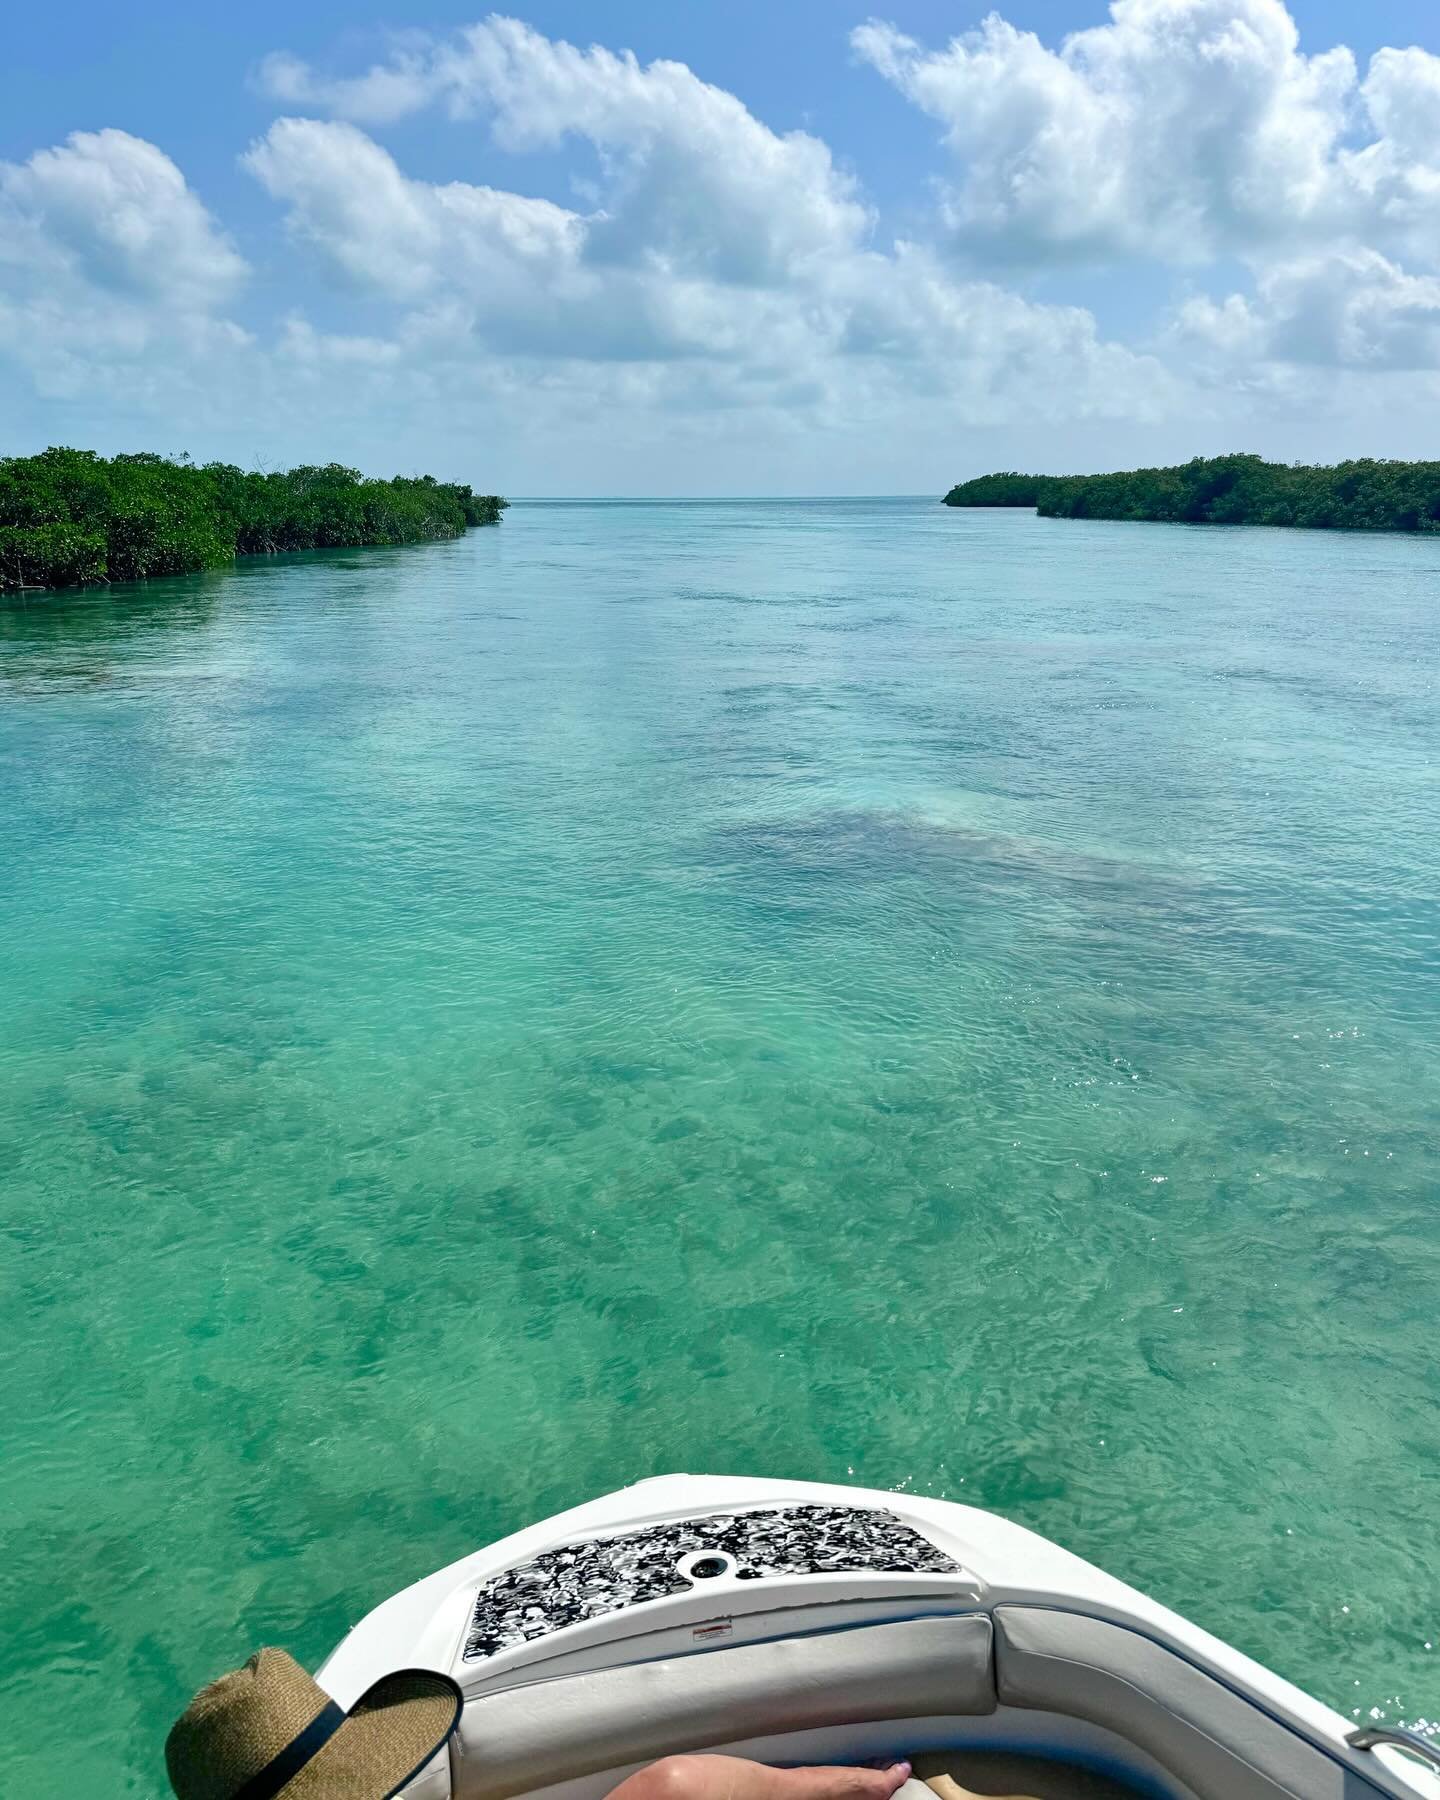 Exploring remote estuaries&hellip; swipe for a surprise ⭐️

#sillycreekwatersports #turksandcaicos #starfish #boatcharter #boatday #oceanlover